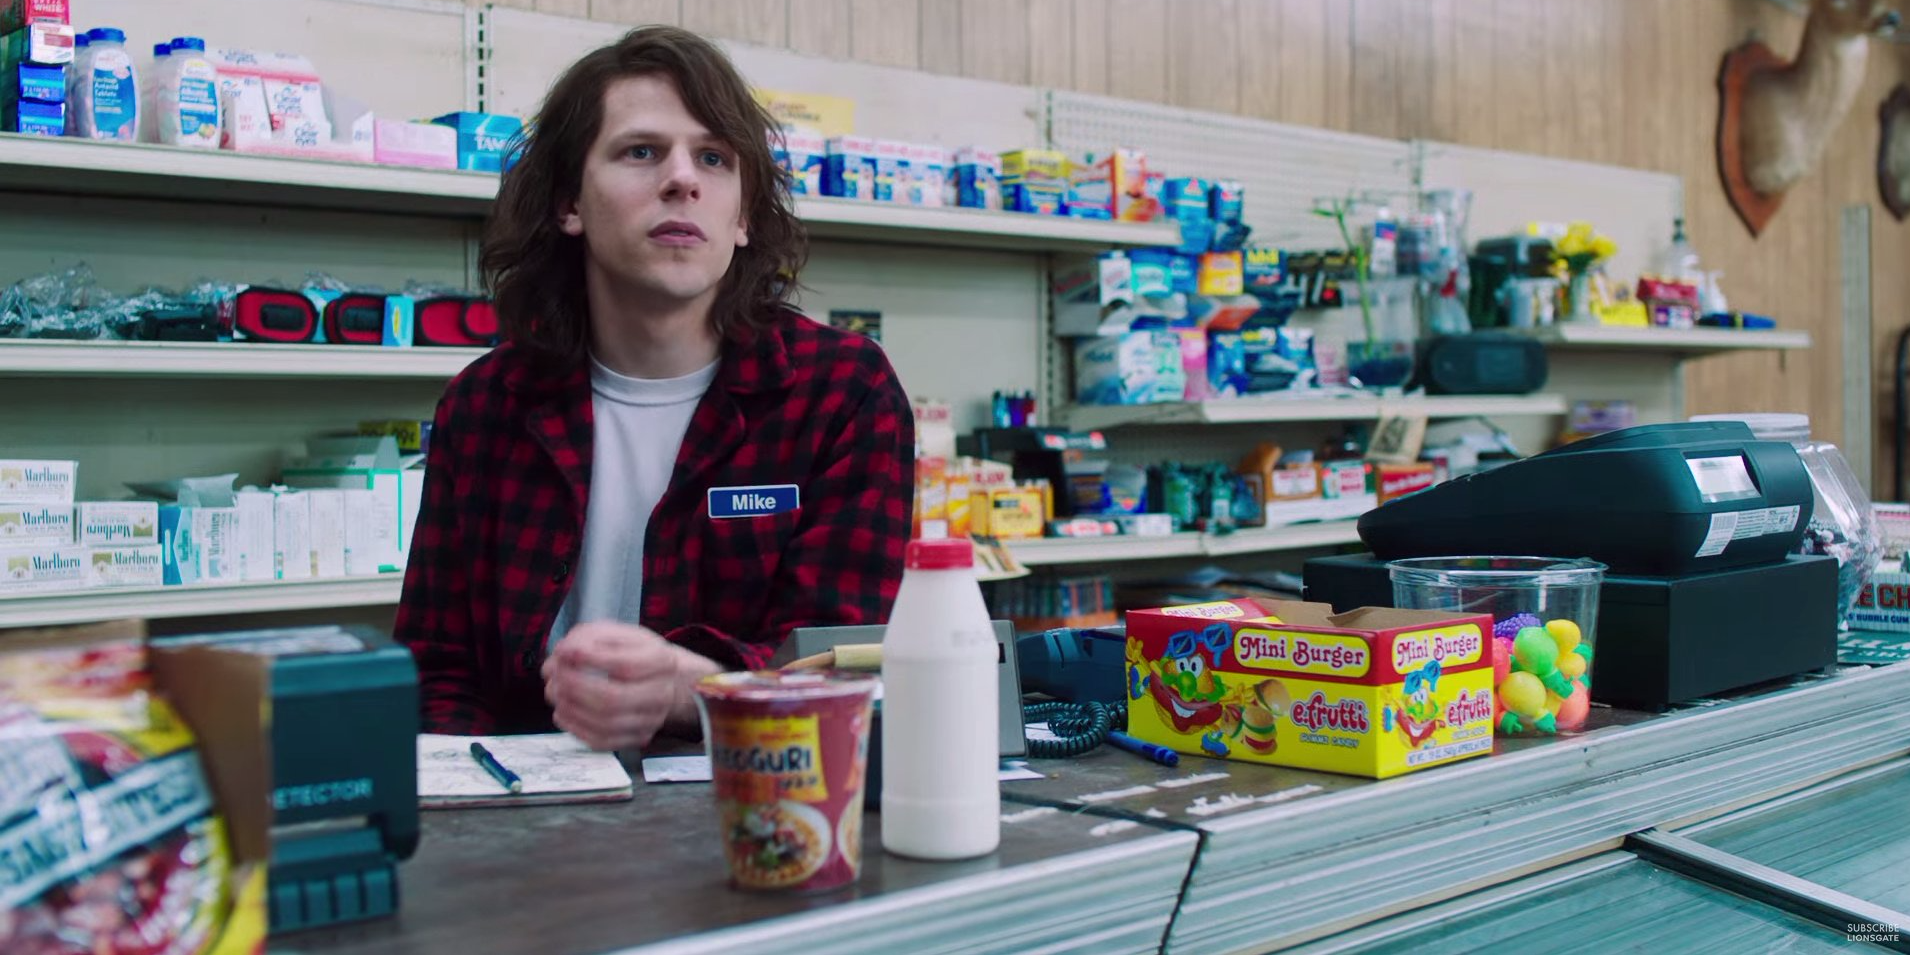 jesse-eisenberg-plays-a-stoner-turned-government-agent-in-the-hilarious-first-trailer-for-american-ultra.jpg